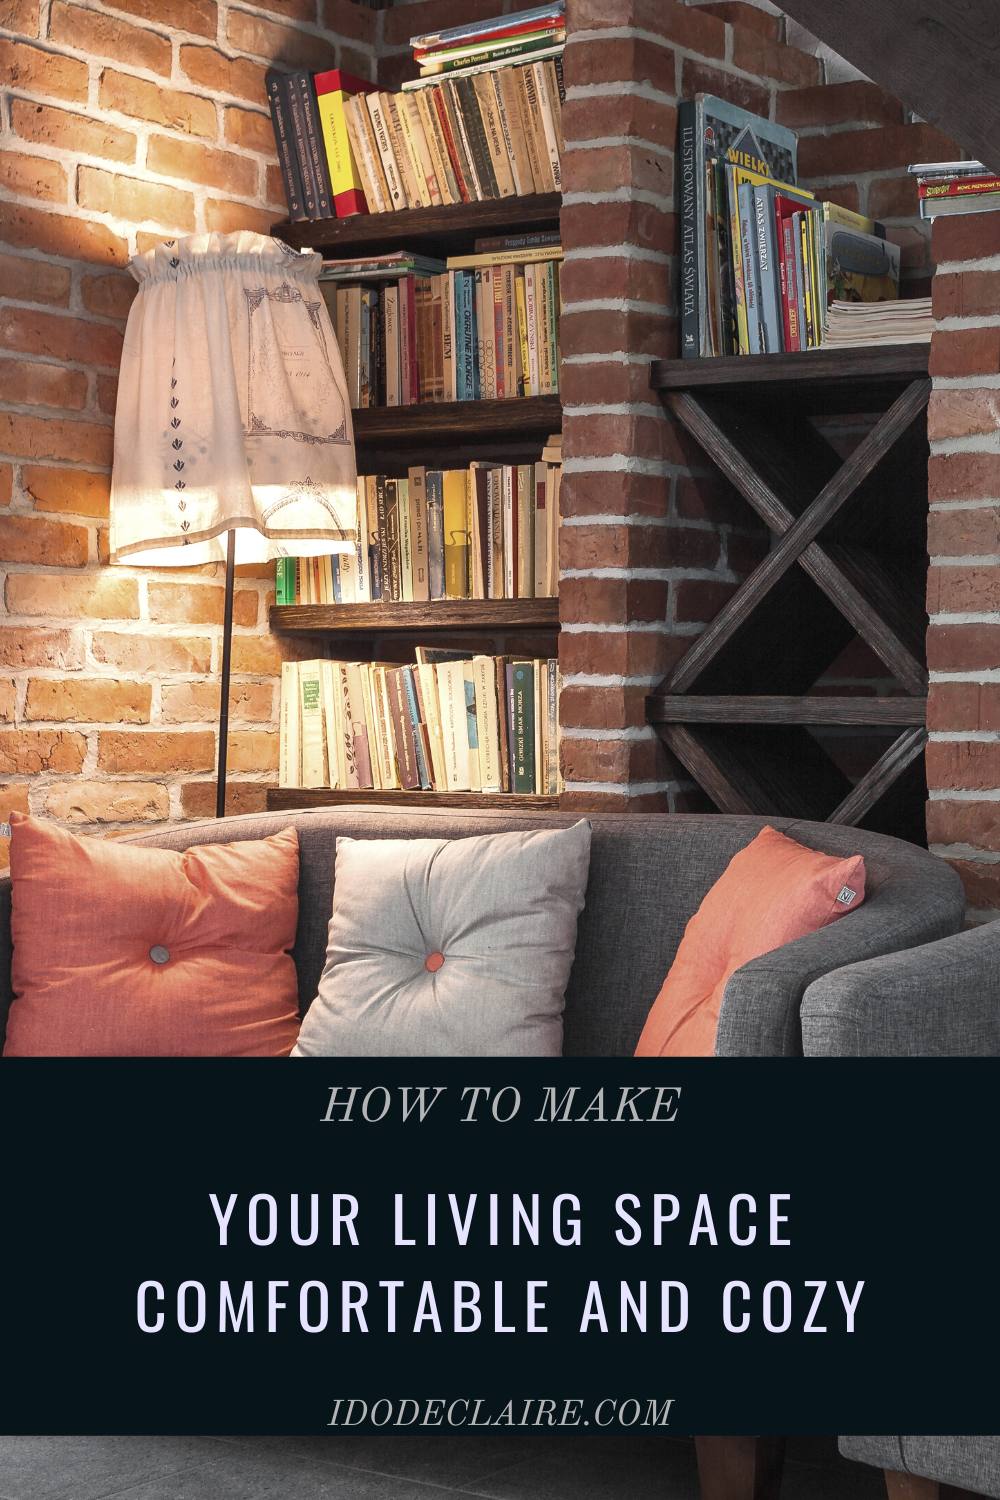 Making Your Living Space Comfortable and Cozy